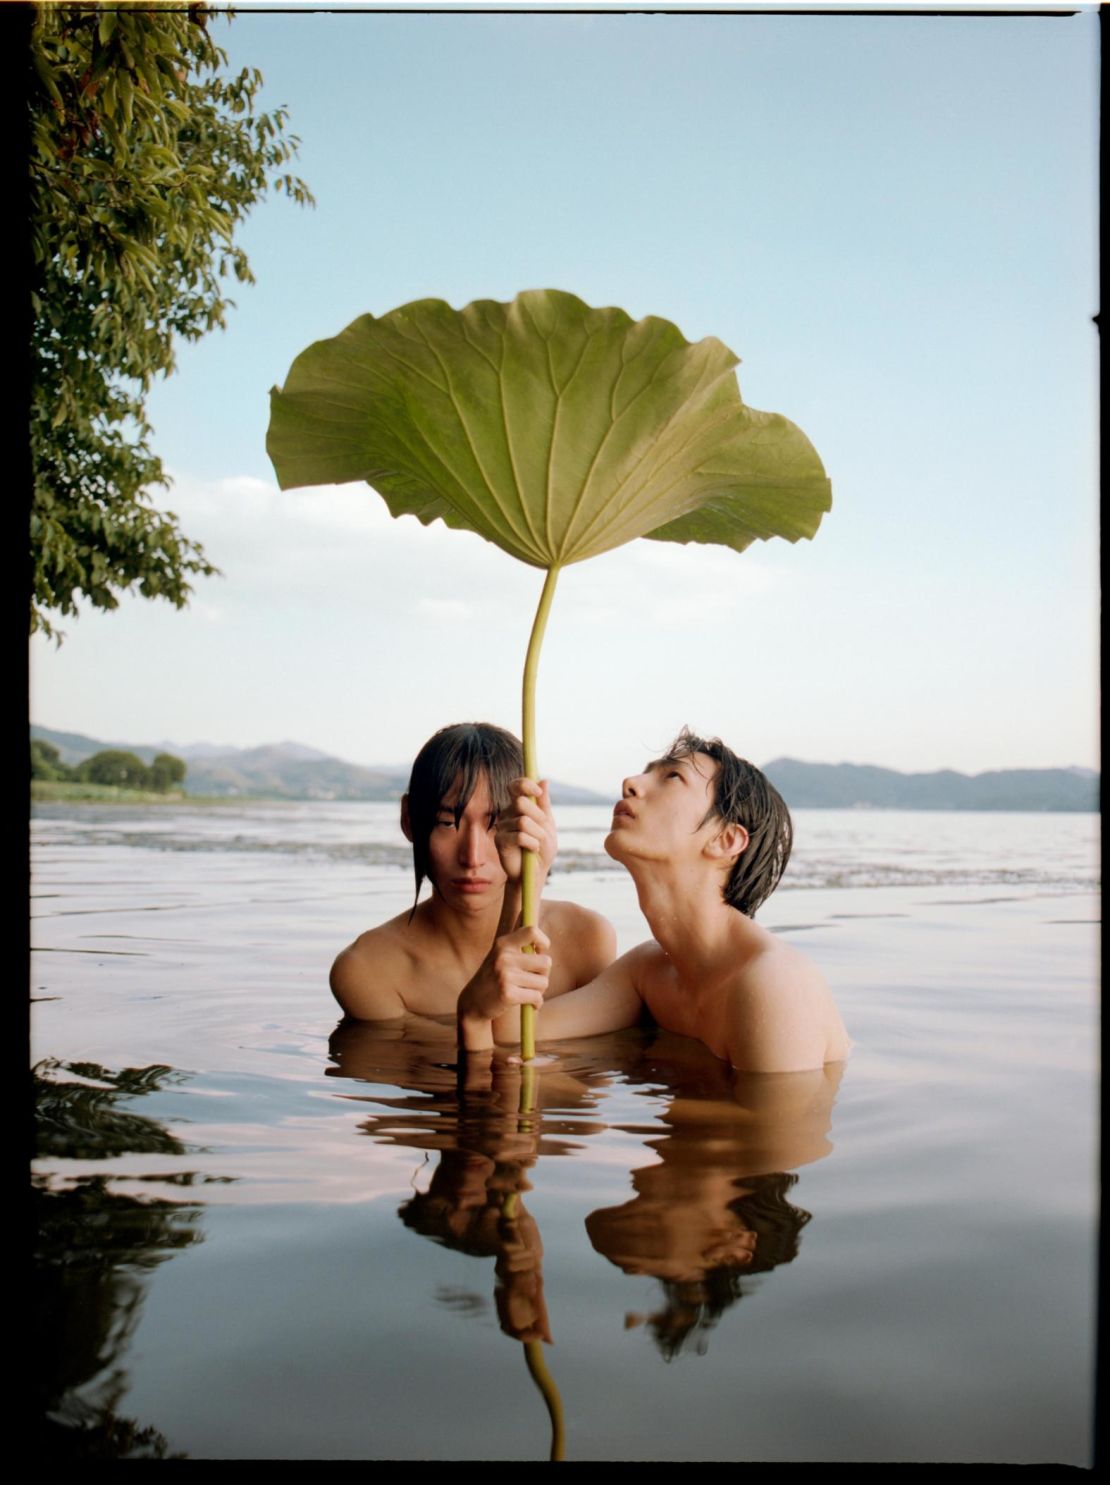 Models pose with giant lotus leaves found on location.